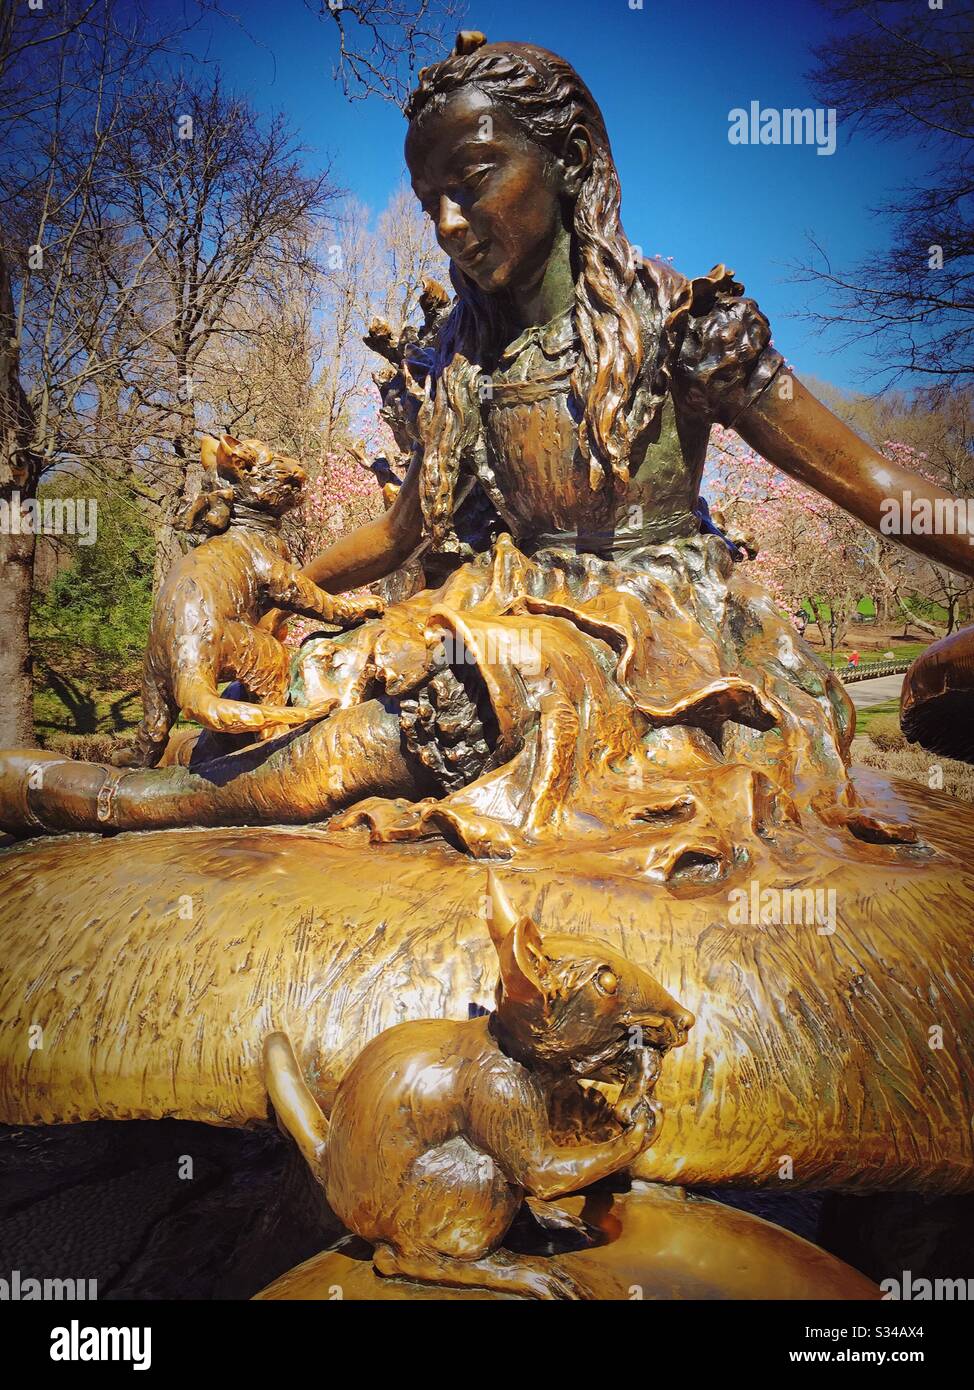 The statue of Alice in wonderland is a bronze sculpture in central park near the toy boat pond as seen in the early spring, NYC, USA Stock Photo